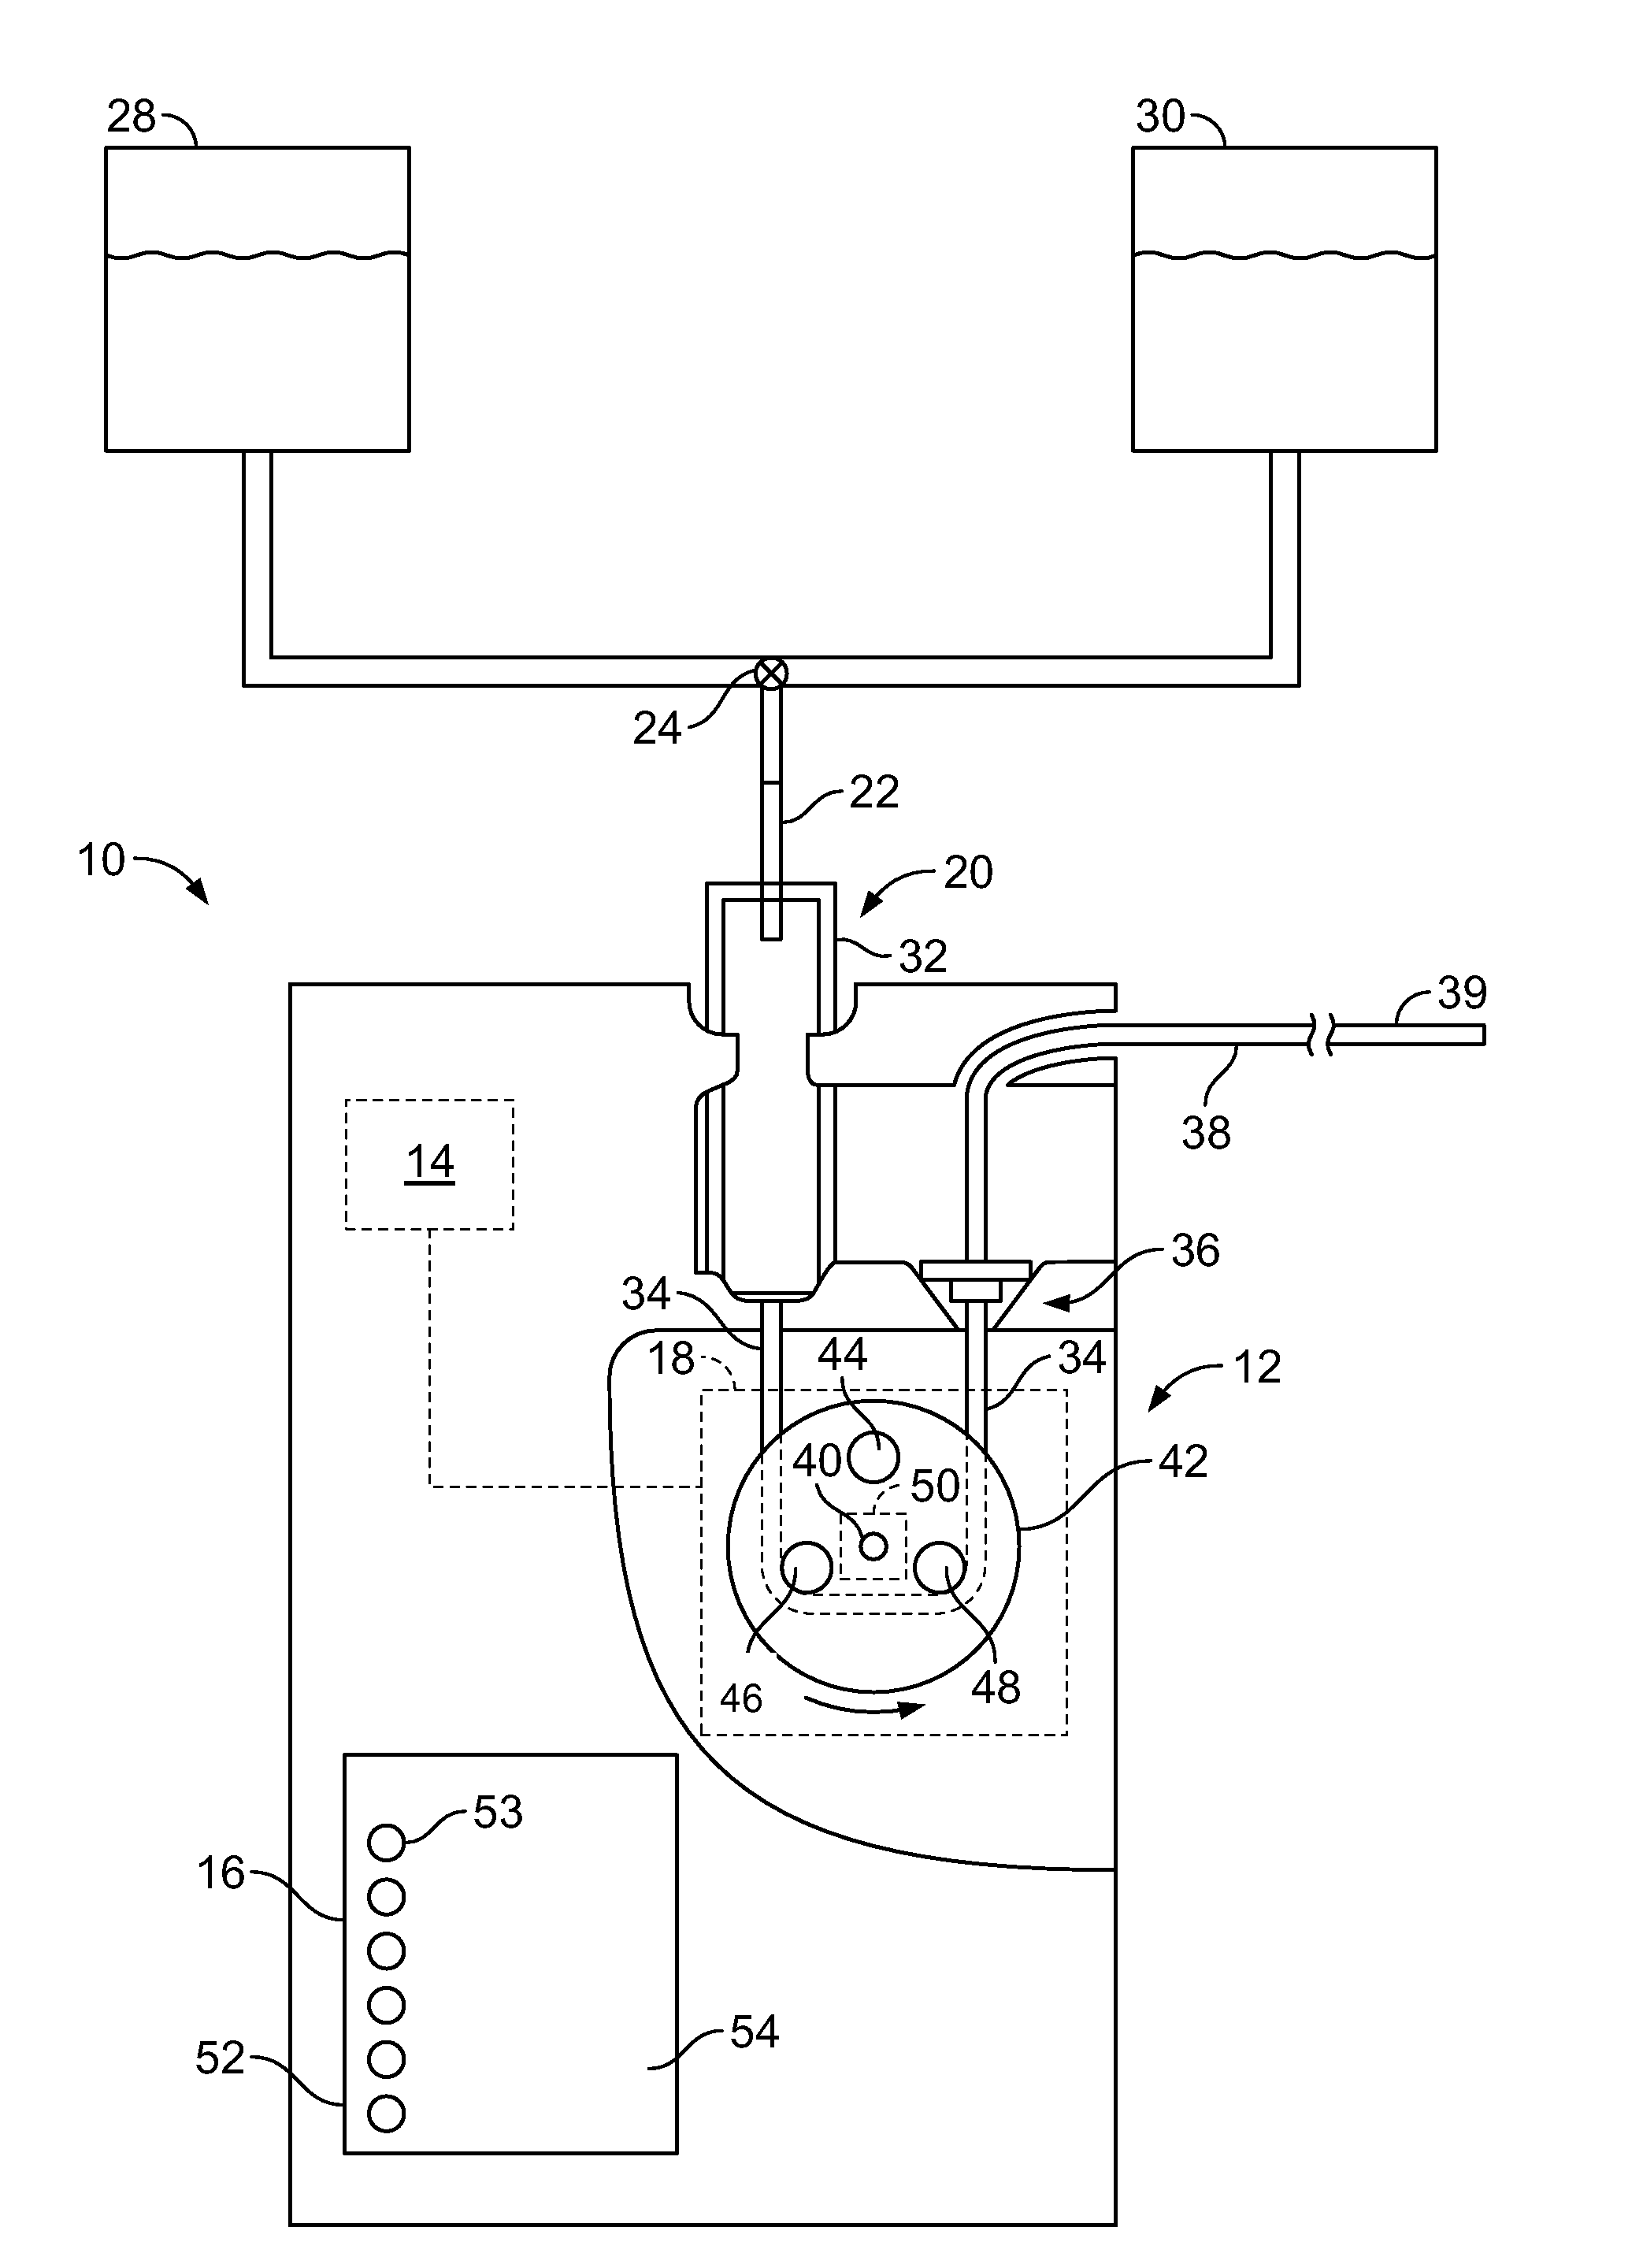 Enteral fluid delivery system and method for opeating the same